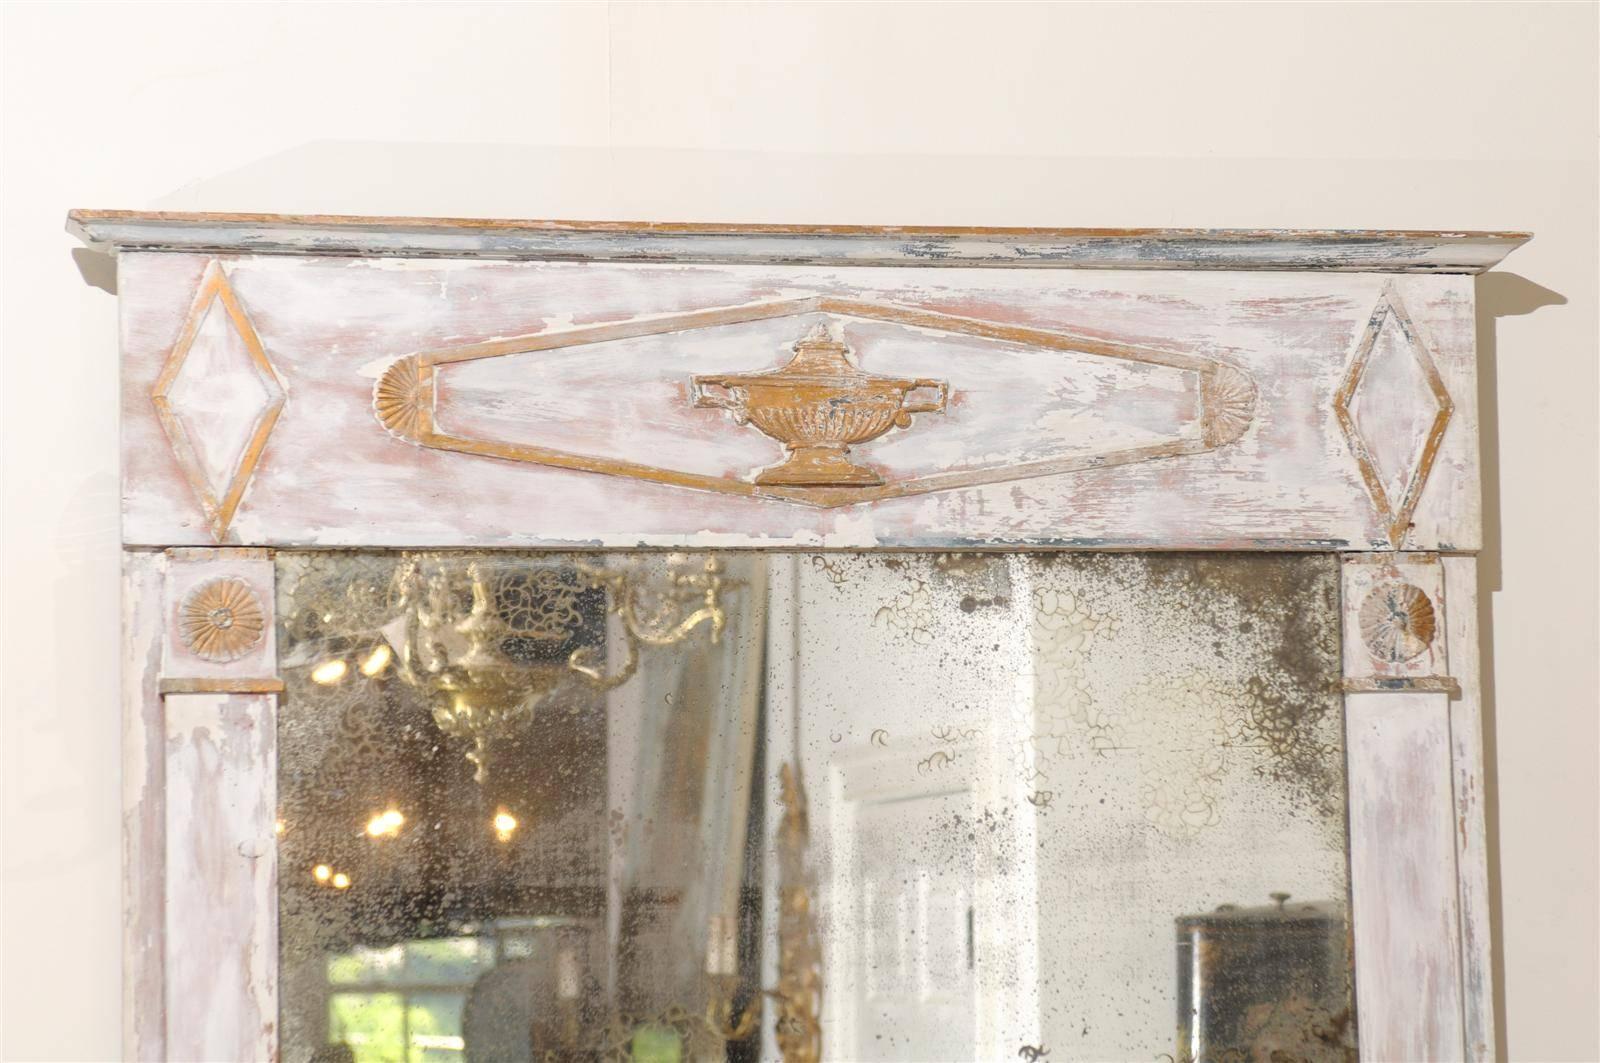 French Period Directoire Trumeau Mirror with Distressed Paint, Late 18th Century For Sale 2